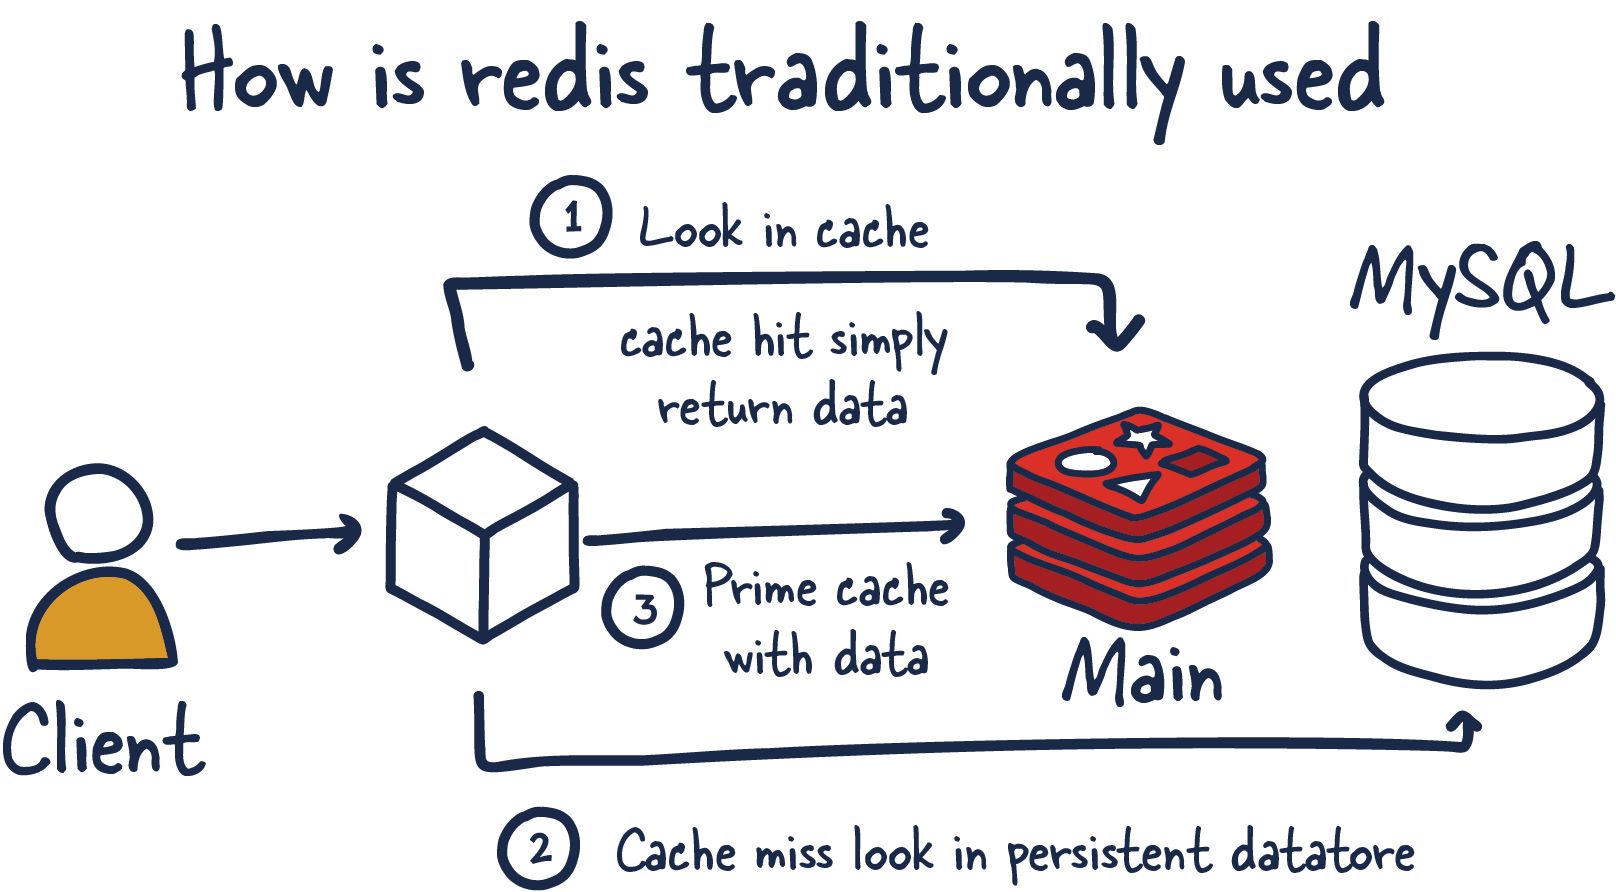 How redis is used for caching